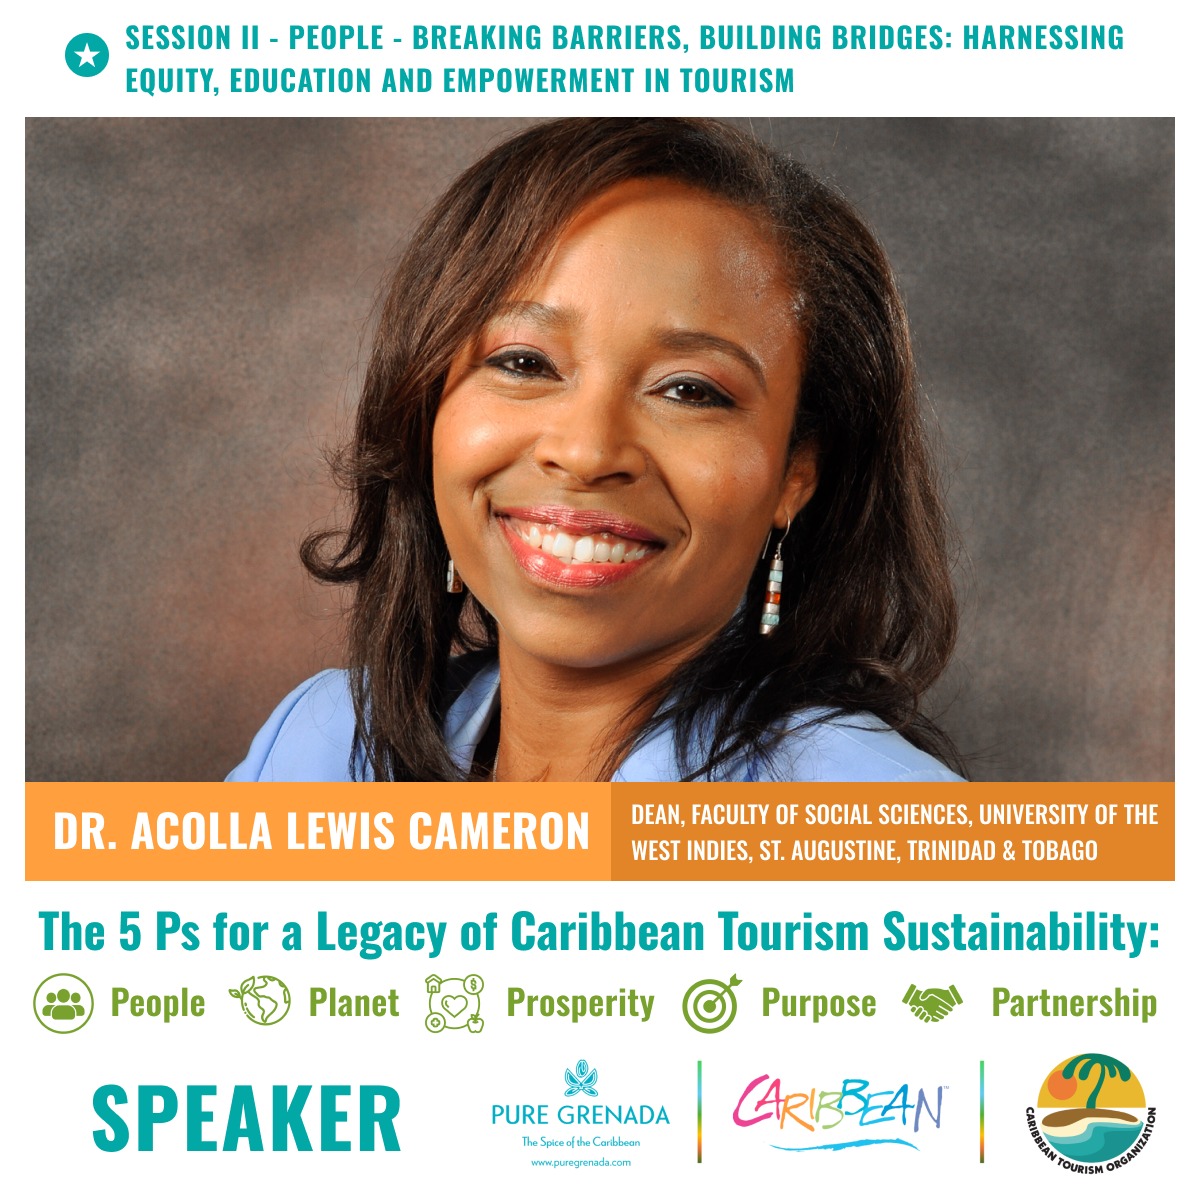 Dr. Acolla Lewis-Cameron, Senior Lecturer and Dean of the Faculty of Social Sciences at the University of the West Indies in Trinidad, will lend her expertise at our #people-focused panel at the Caribbean Sustainable Tourism Conference on Monday, April 22, in Grenada.